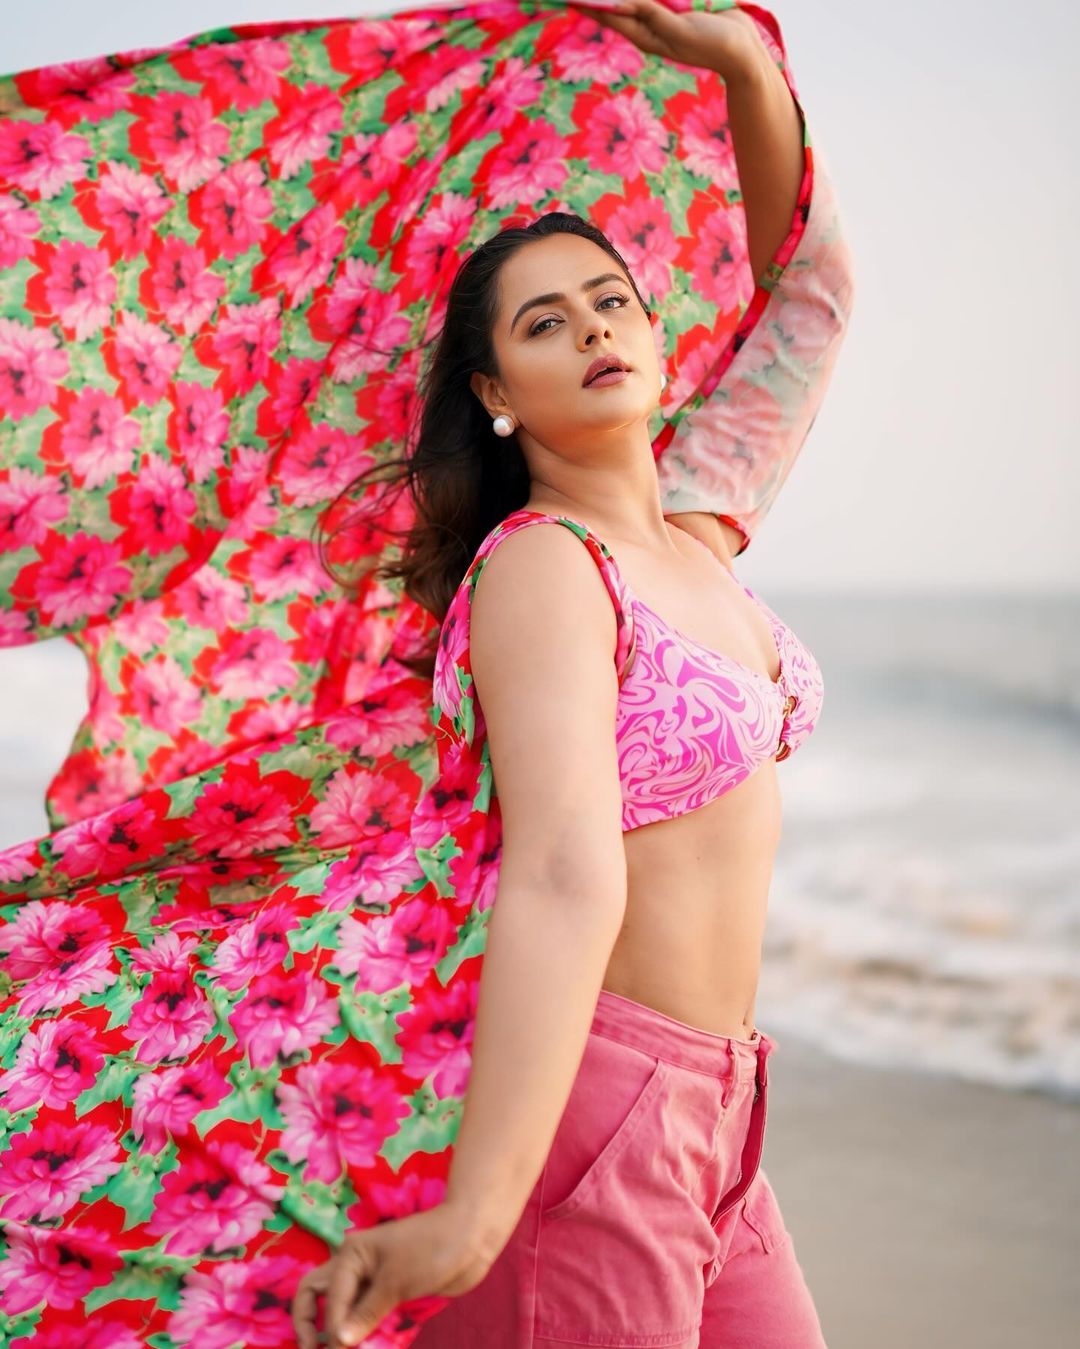 Young beauty prachi tehlan glamorous images-Actressprachi, Praachi Tehlan, Prach Tehlan, Prachi Tehlan, Prachitehlan, Tvactress Photos,Spicy Hot Pics,Images,High Resolution WallPapers Download